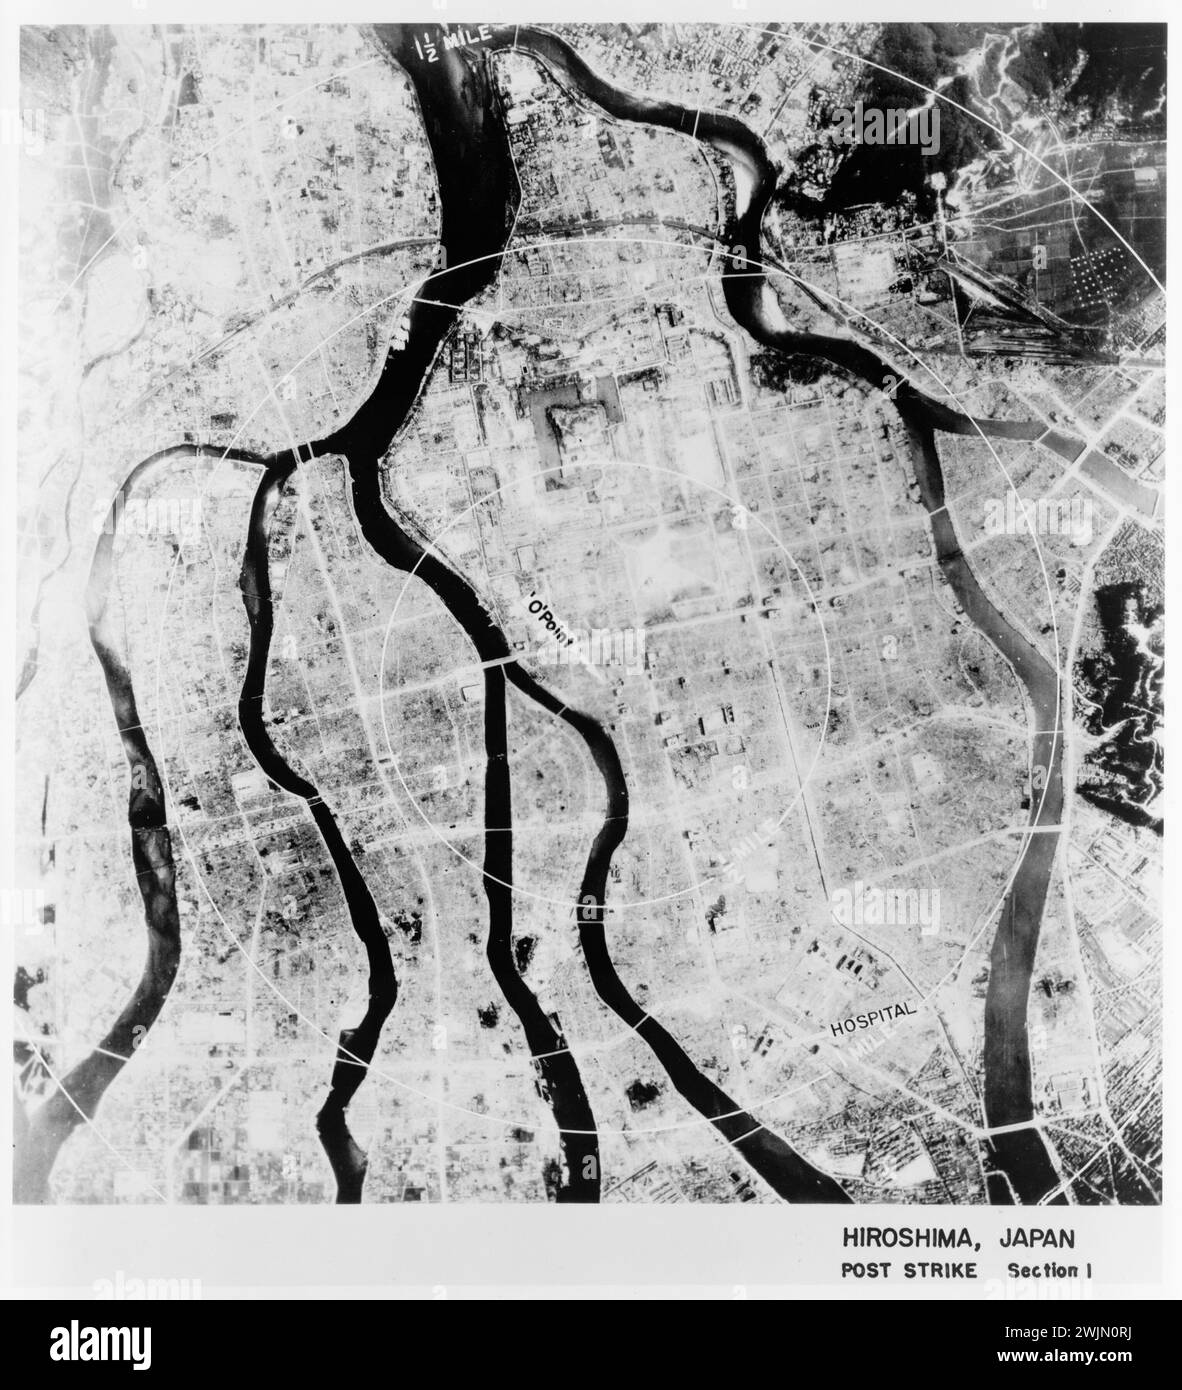 Atomic Bomb disaster, Japan - Aerial view of Hiroshima after the bomb, 1946 - U.S. Army photo. Stock Photo